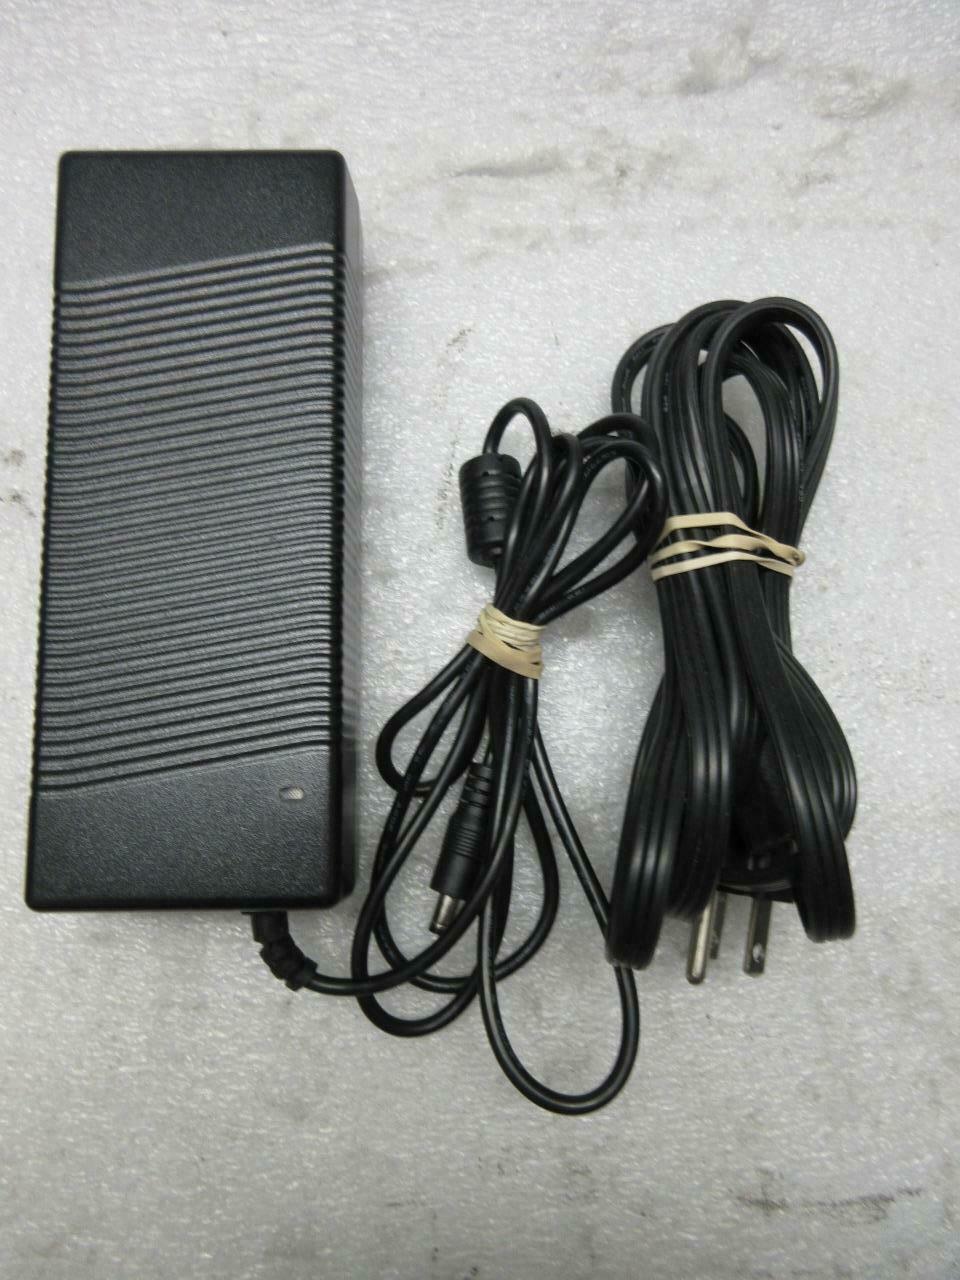 Original CWT Guanshuo 24V1.875a power adapter CAE045242 printer scanner charging cable 45W Power brand: CWT/Guanshuo [Mo